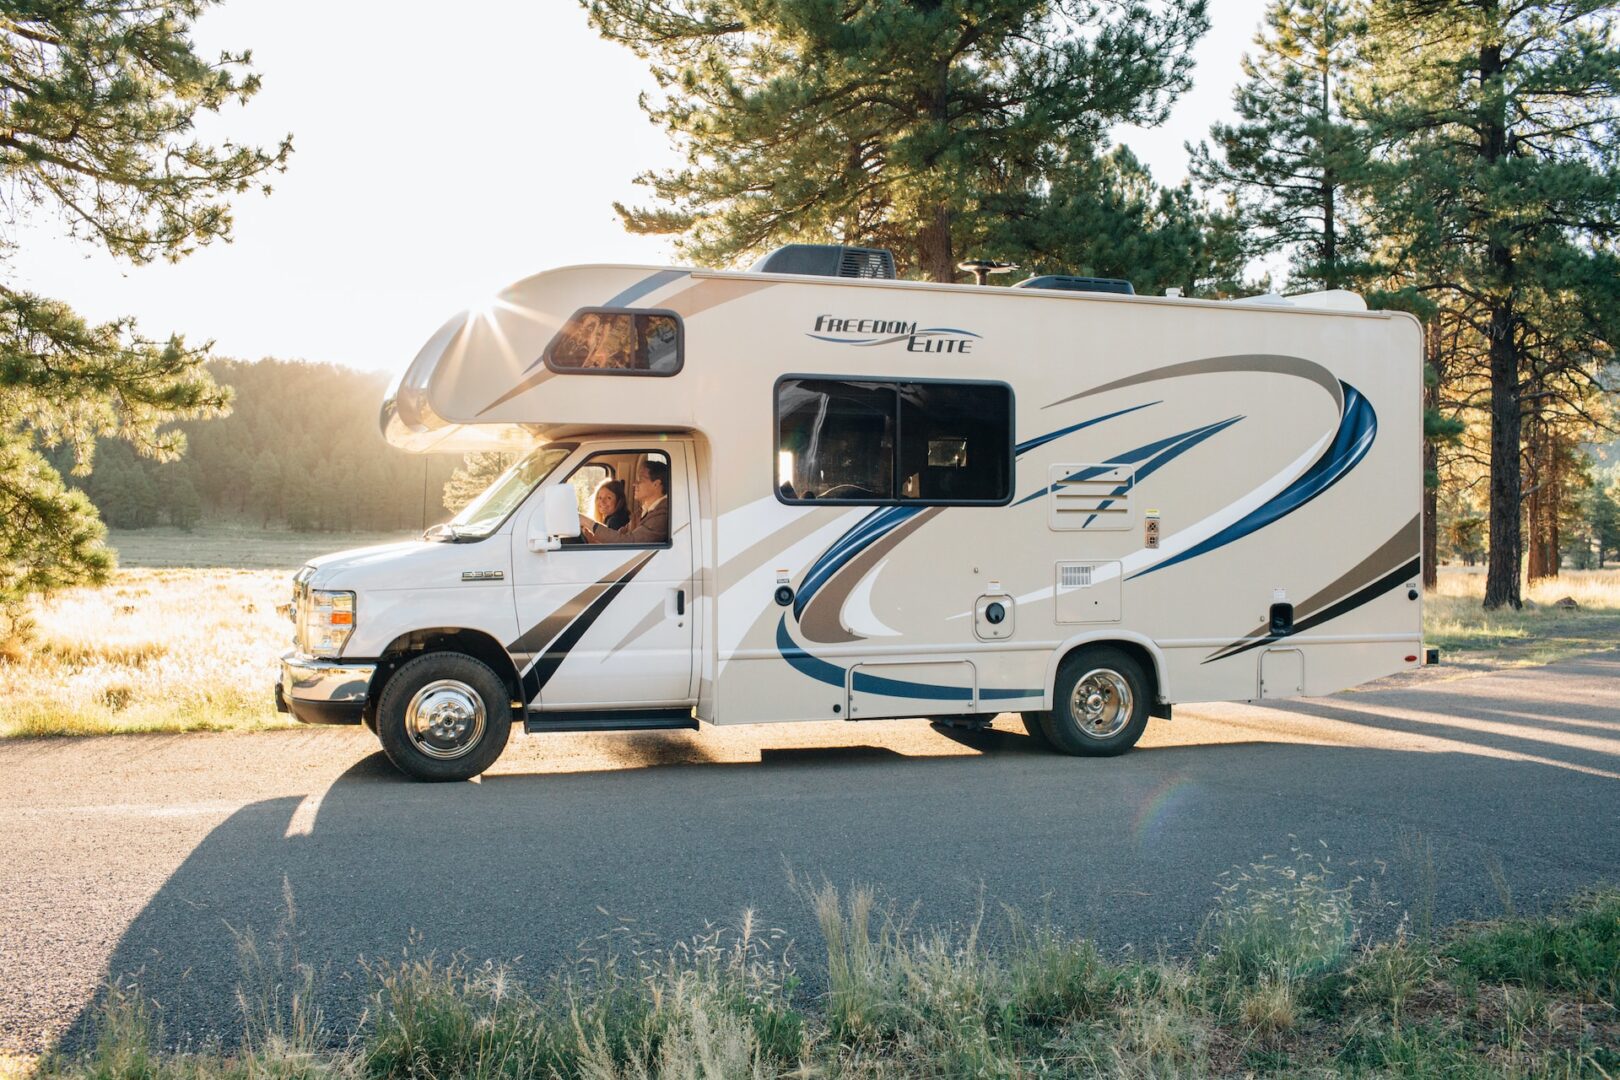 A white and blue rv is parked on the side of the road.